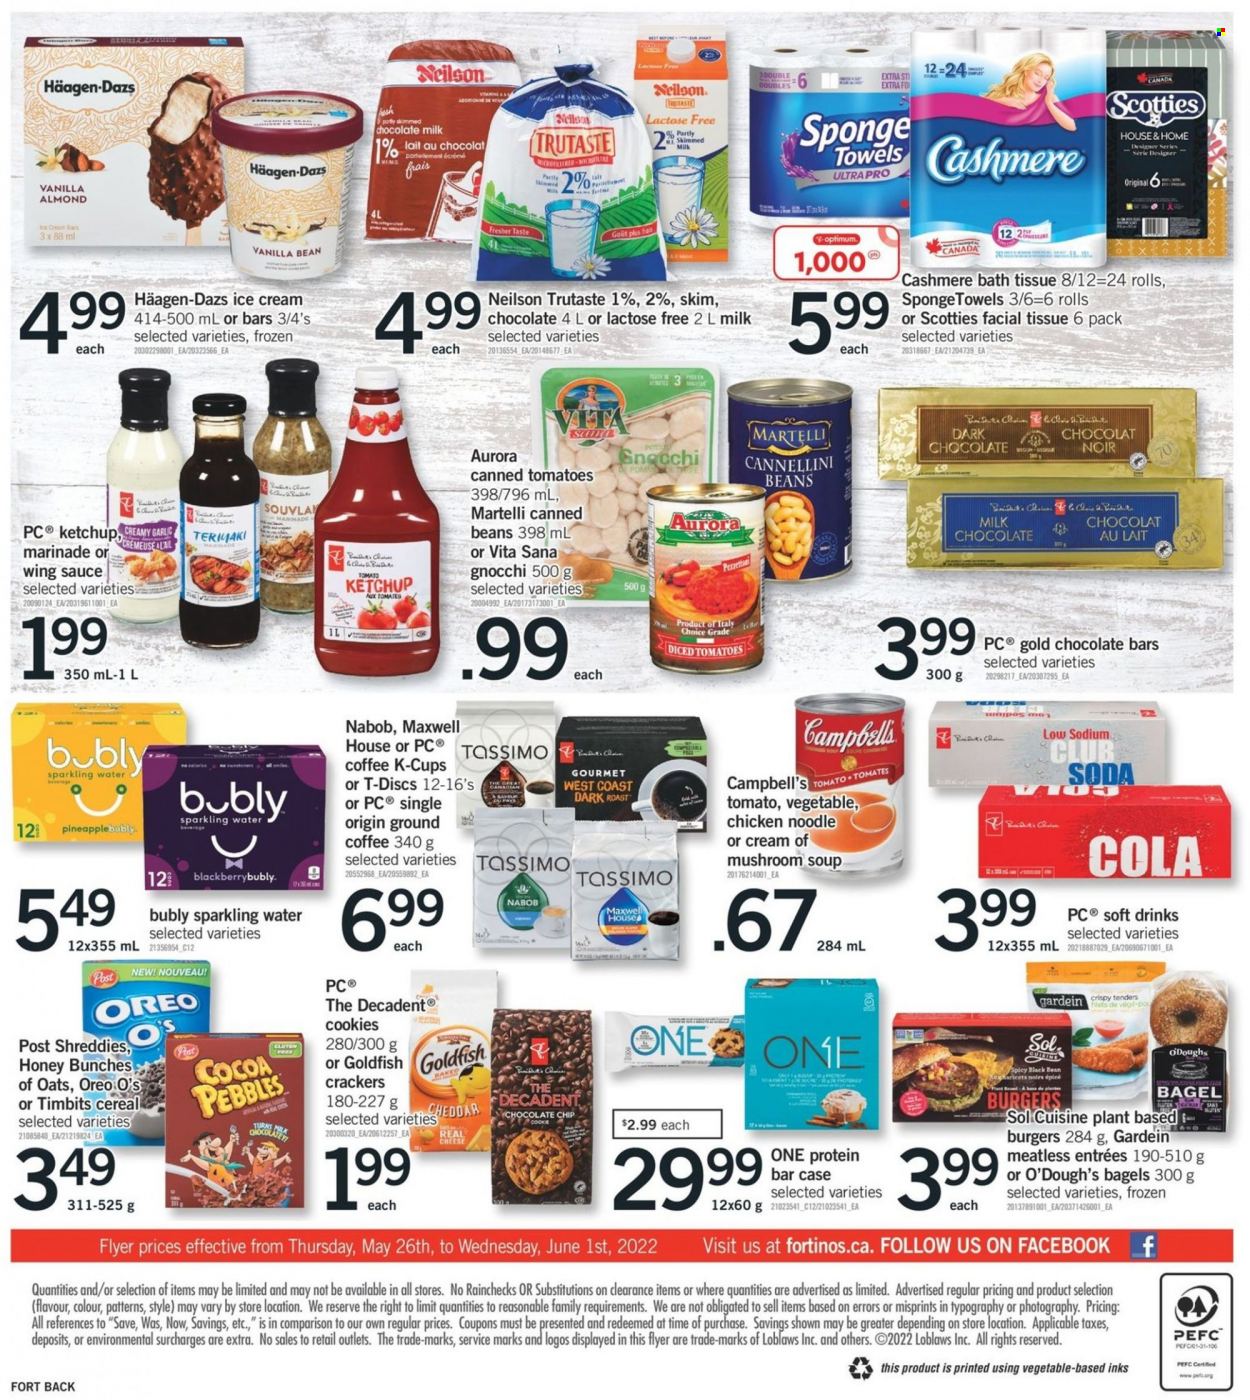 thumbnail - Fortinos Flyer - May 26, 2022 - June 01, 2022 - Sales products - bagels, garlic, tomatoes, Campbell's, mushroom soup, soup, hamburger, sauce, noodles, cheese, ice cream, ice cream bars, Häagen-Dazs, cookies, milk chocolate, crackers, dark chocolate, chocolate bar, Goldfish, cannellini beans, diced tomatoes, cereals, protein bar, marinade, wing sauce, soft drink, Club Soda, sparkling water, Maxwell House, coffee, ground coffee, coffee capsules, K-Cups, bath tissue, sponge, towel, Optimum, gnocchi, ketchup, Oreo. Page 2.